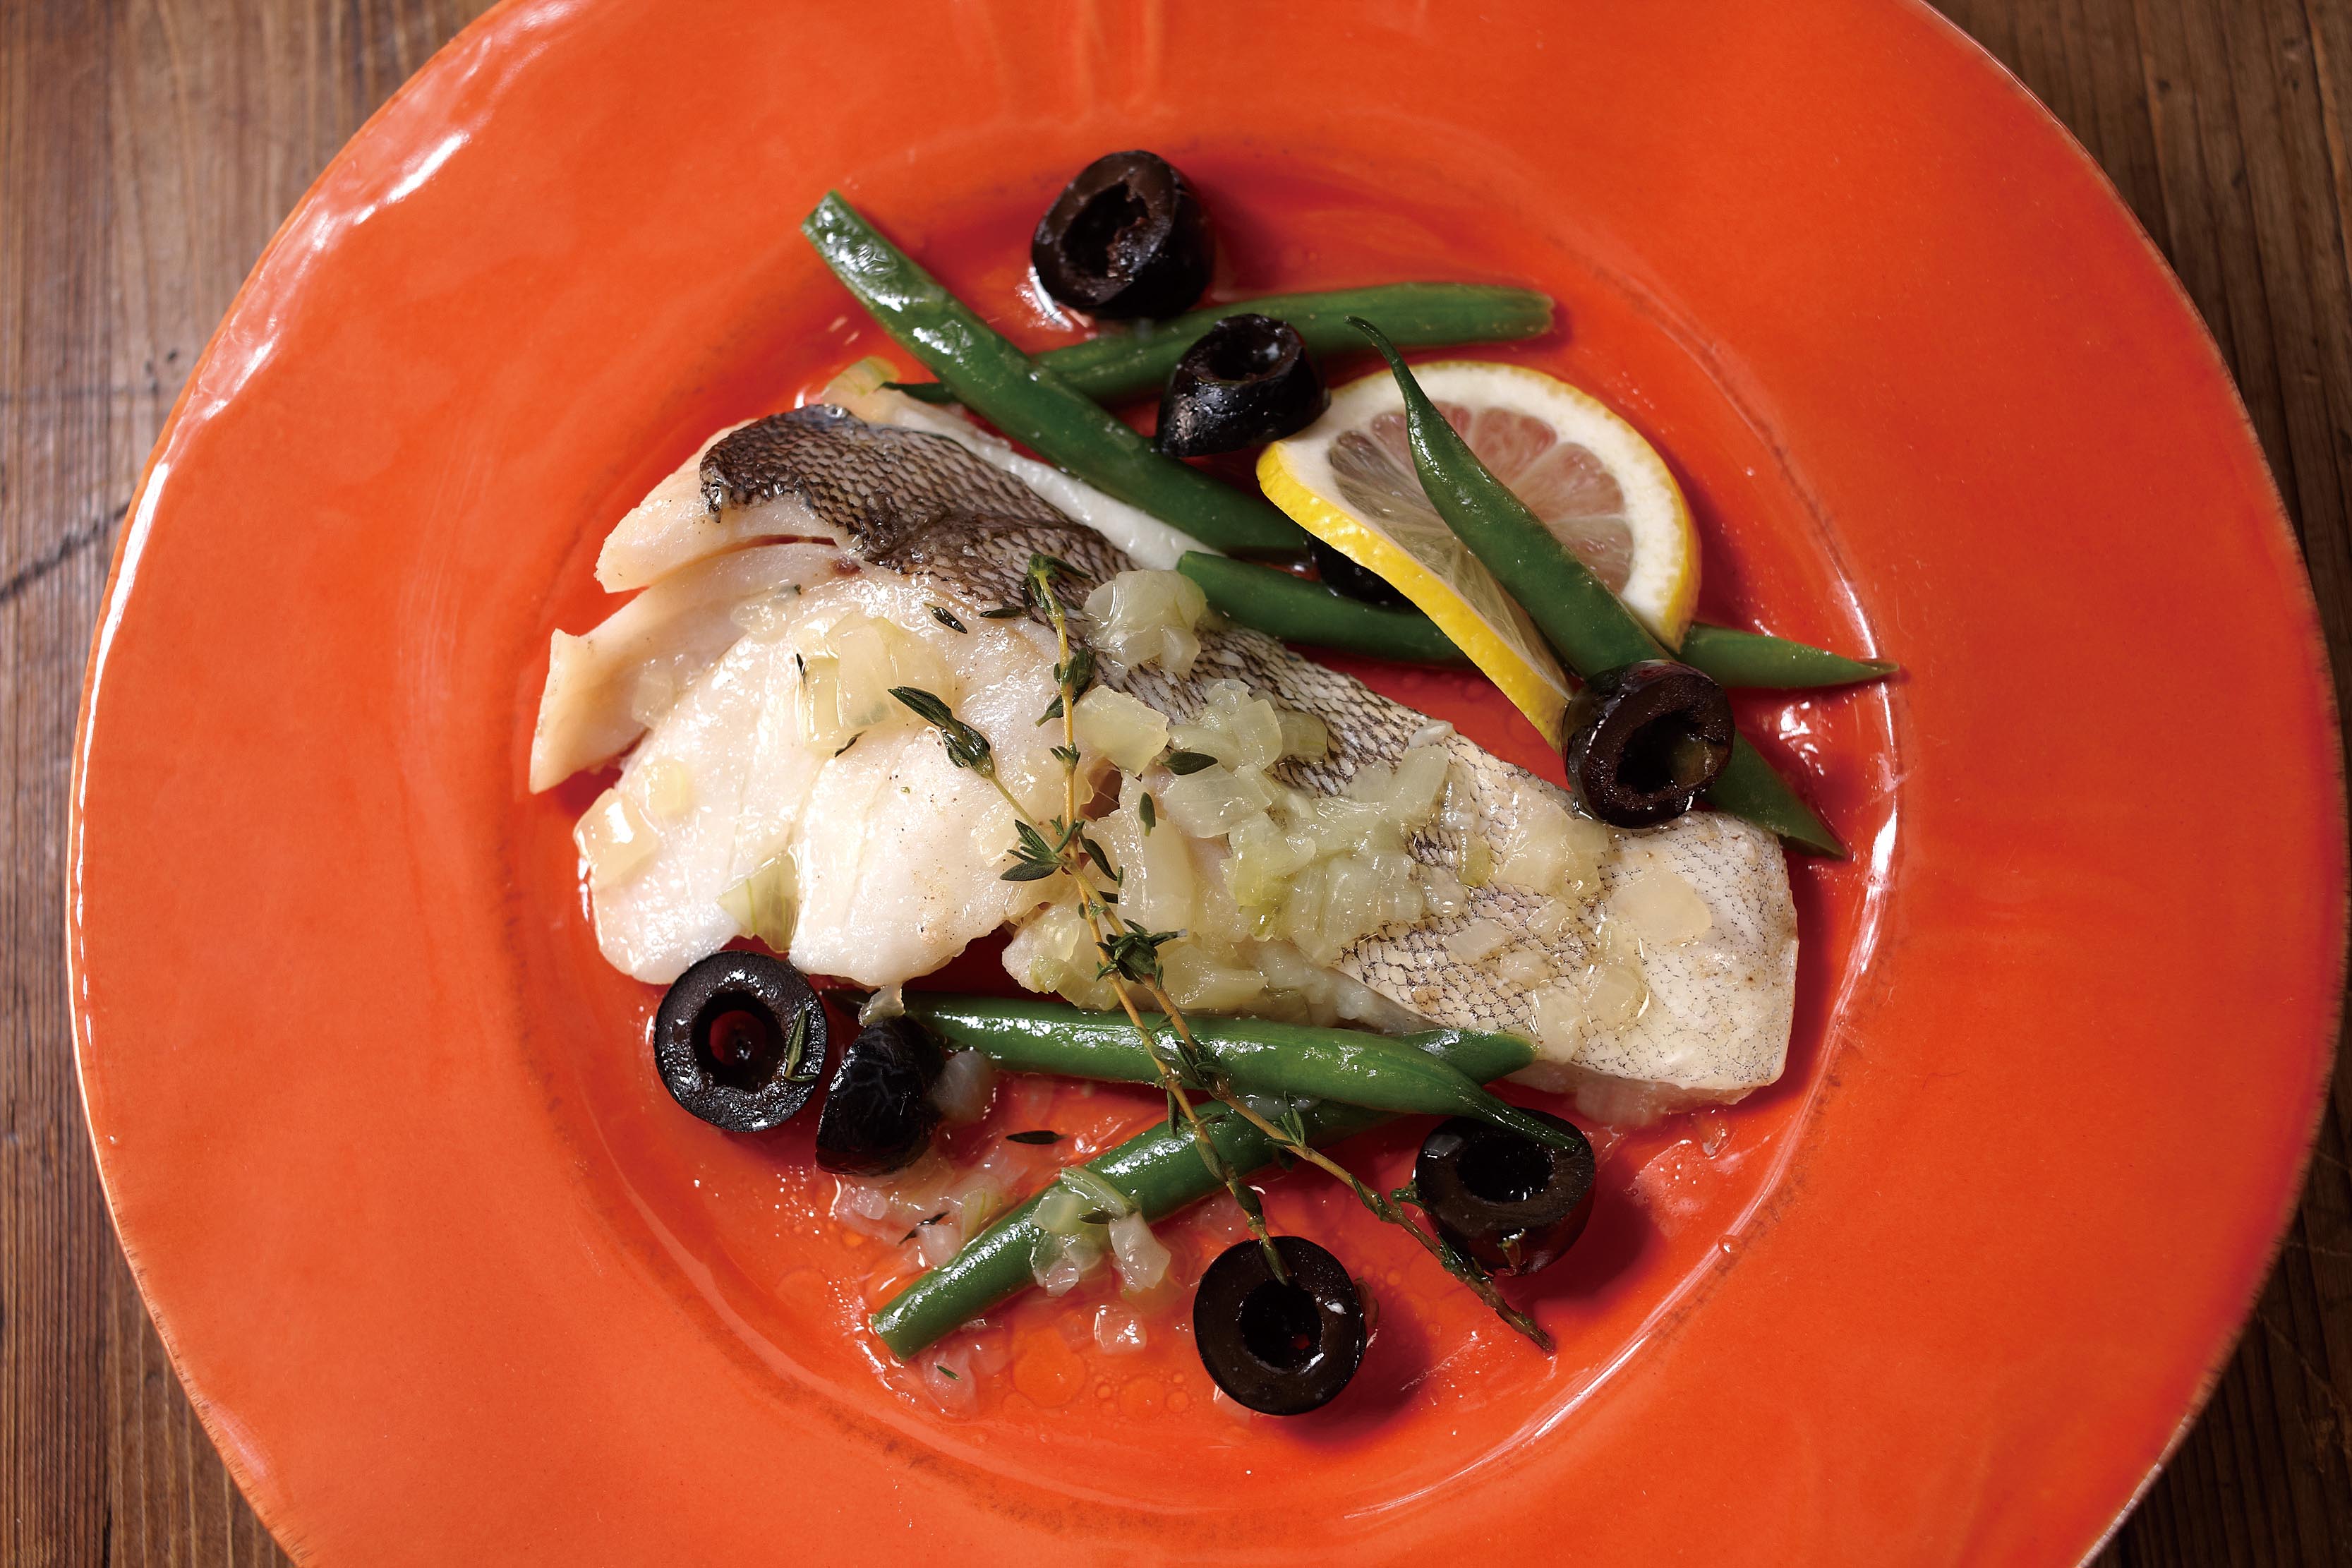 Acqua Pazza - a yummy poached fish recipe served in a light, fragrant broth, green beans and black olives. #fishrecipes #steamed #tigerricecooker | TigerUSA